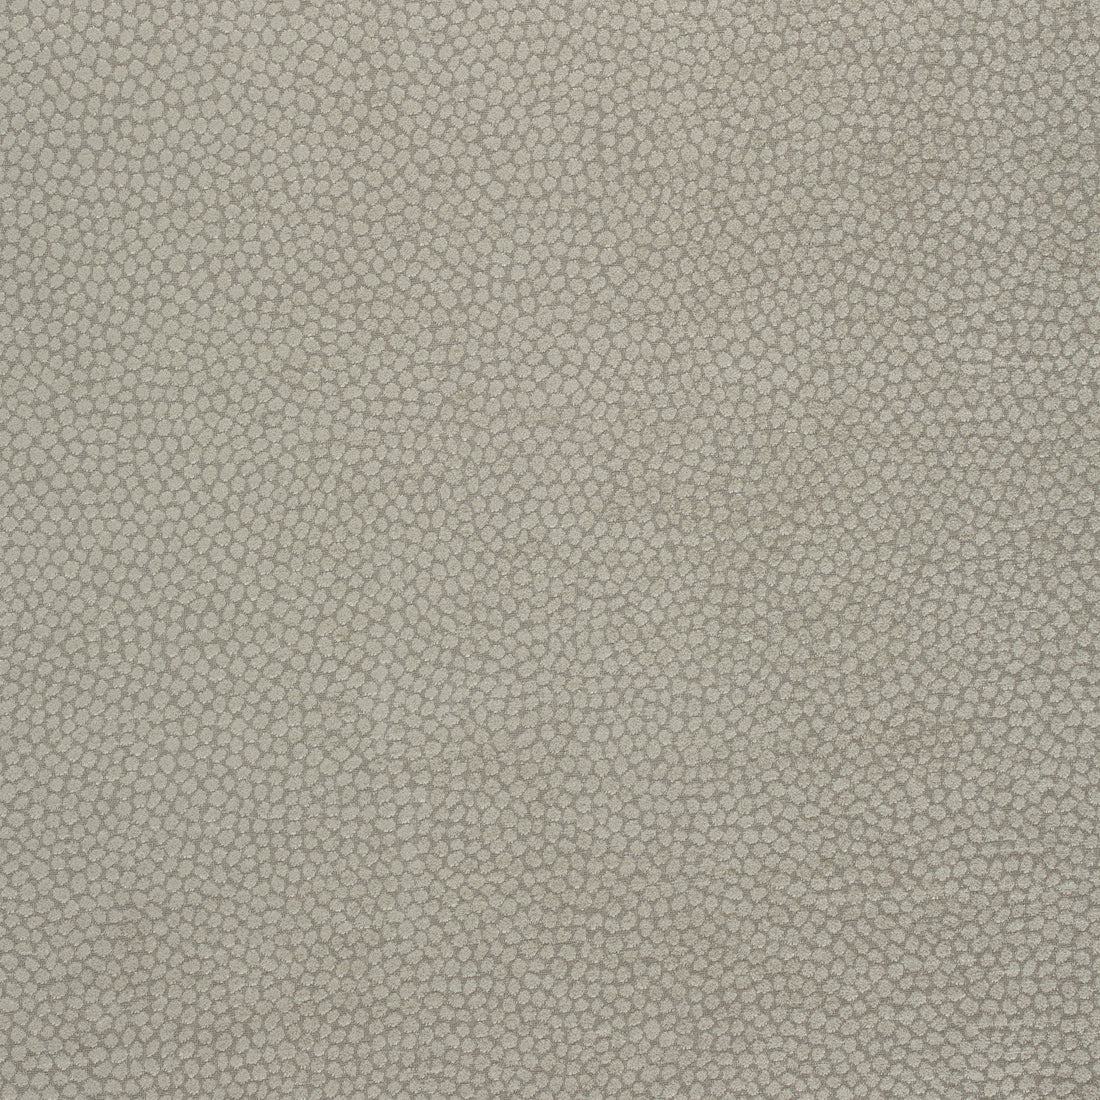 Kali fabric in stone color - pattern number W80518 - by Thibaut in the Mosaic collection